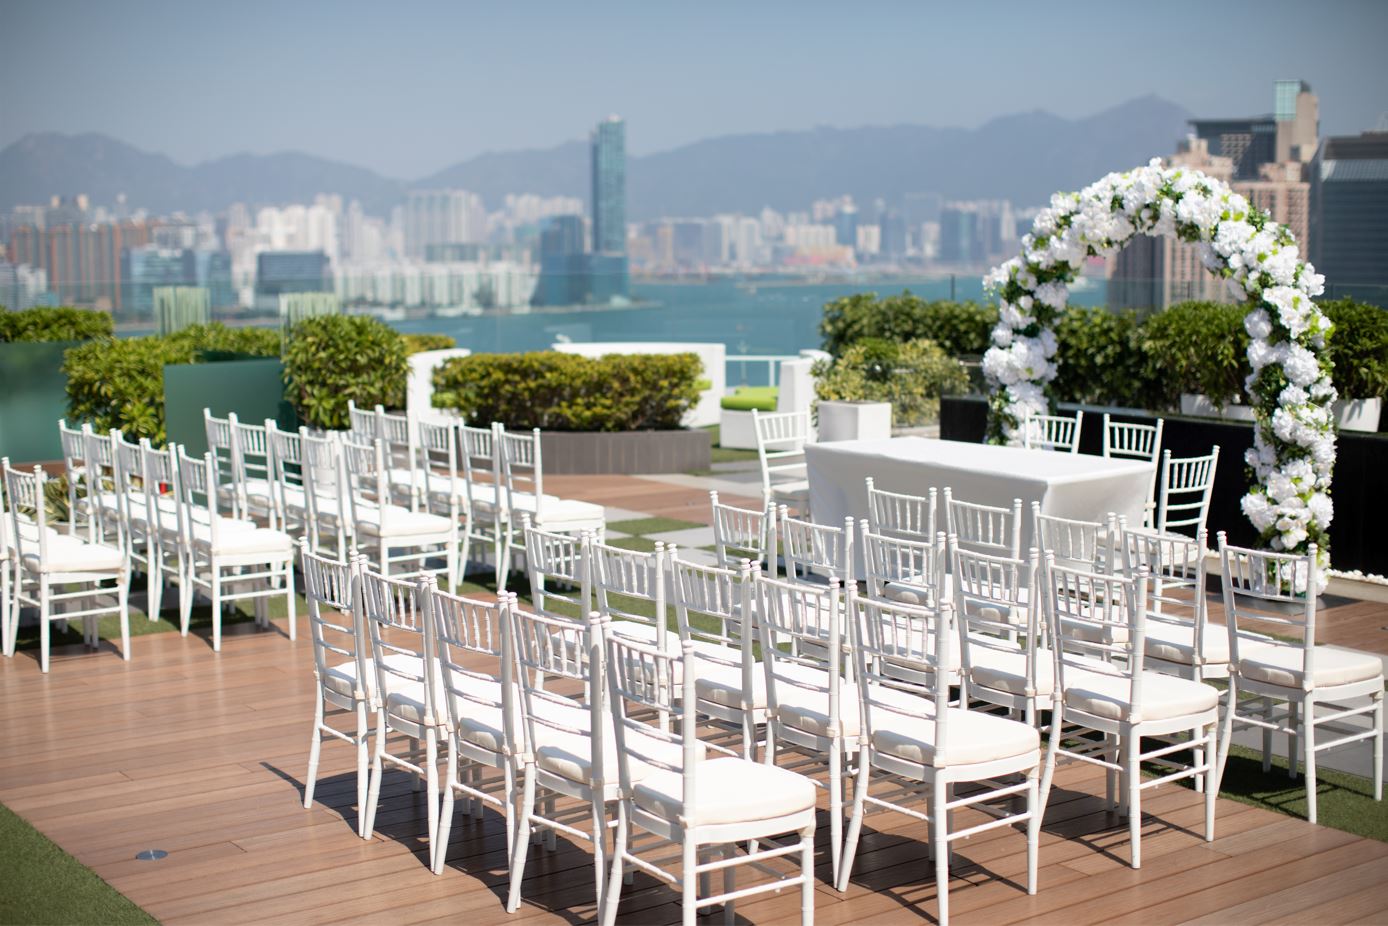 A wedding ceremony on the Rooftop Garden of the Park Lane Hong Kong